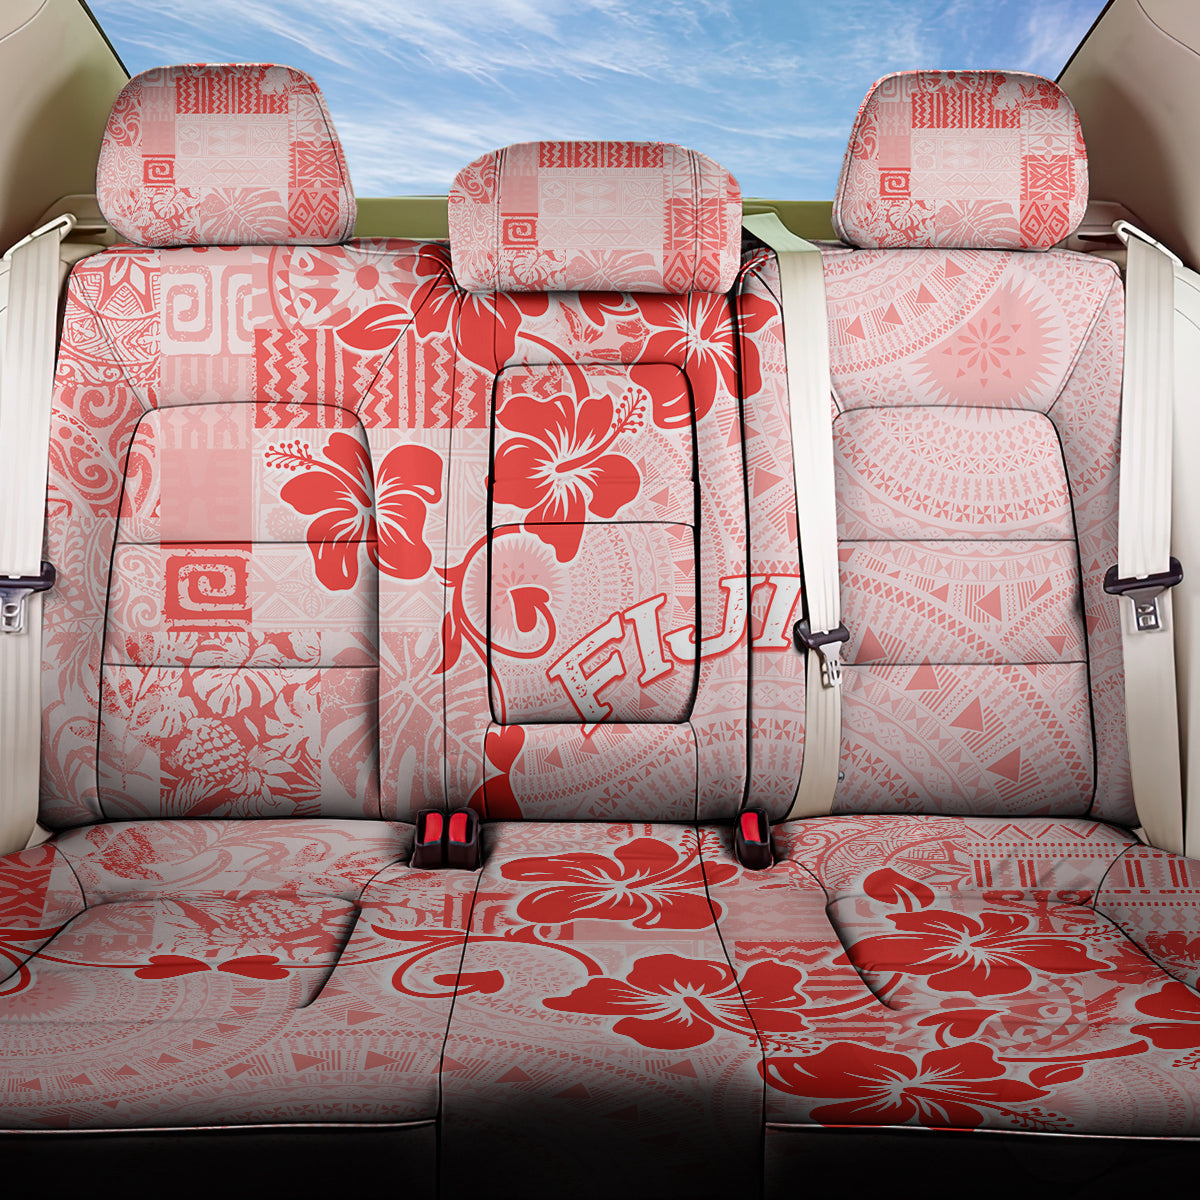 Fiji Masi With Hibiscus Tapa Tribal Back Car Seat Cover Red Pastel LT01 One Size Red - Polynesian Pride